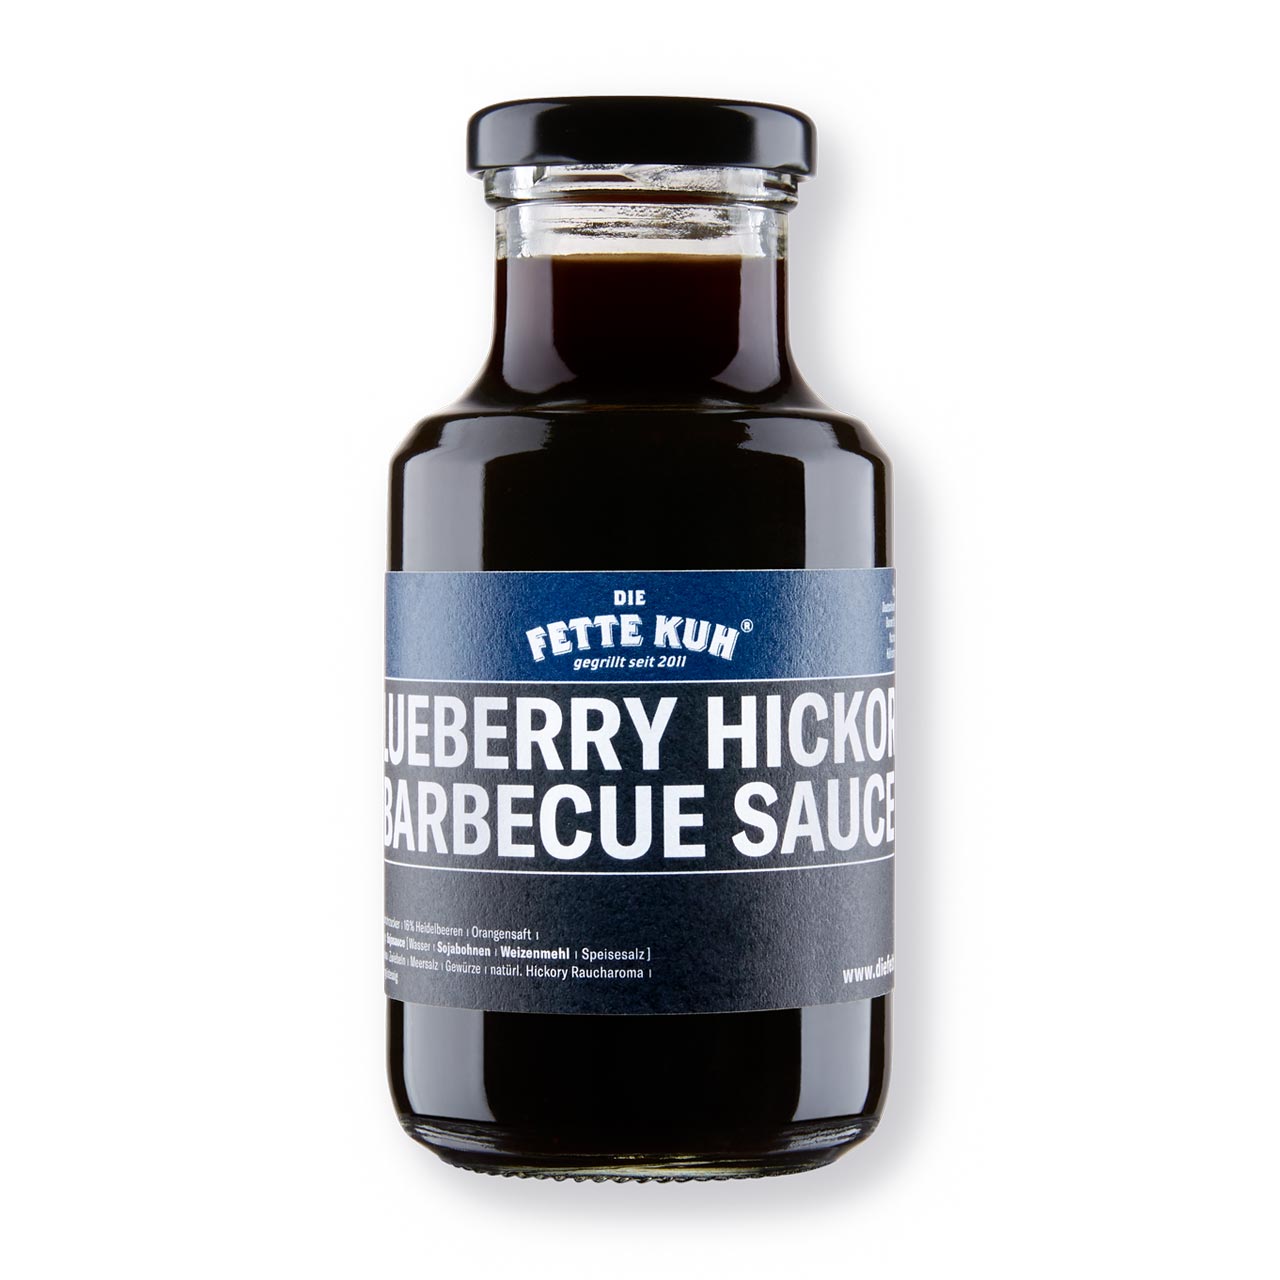 Die Fette Kuh Blueberry Hickory Barbecue Sauce